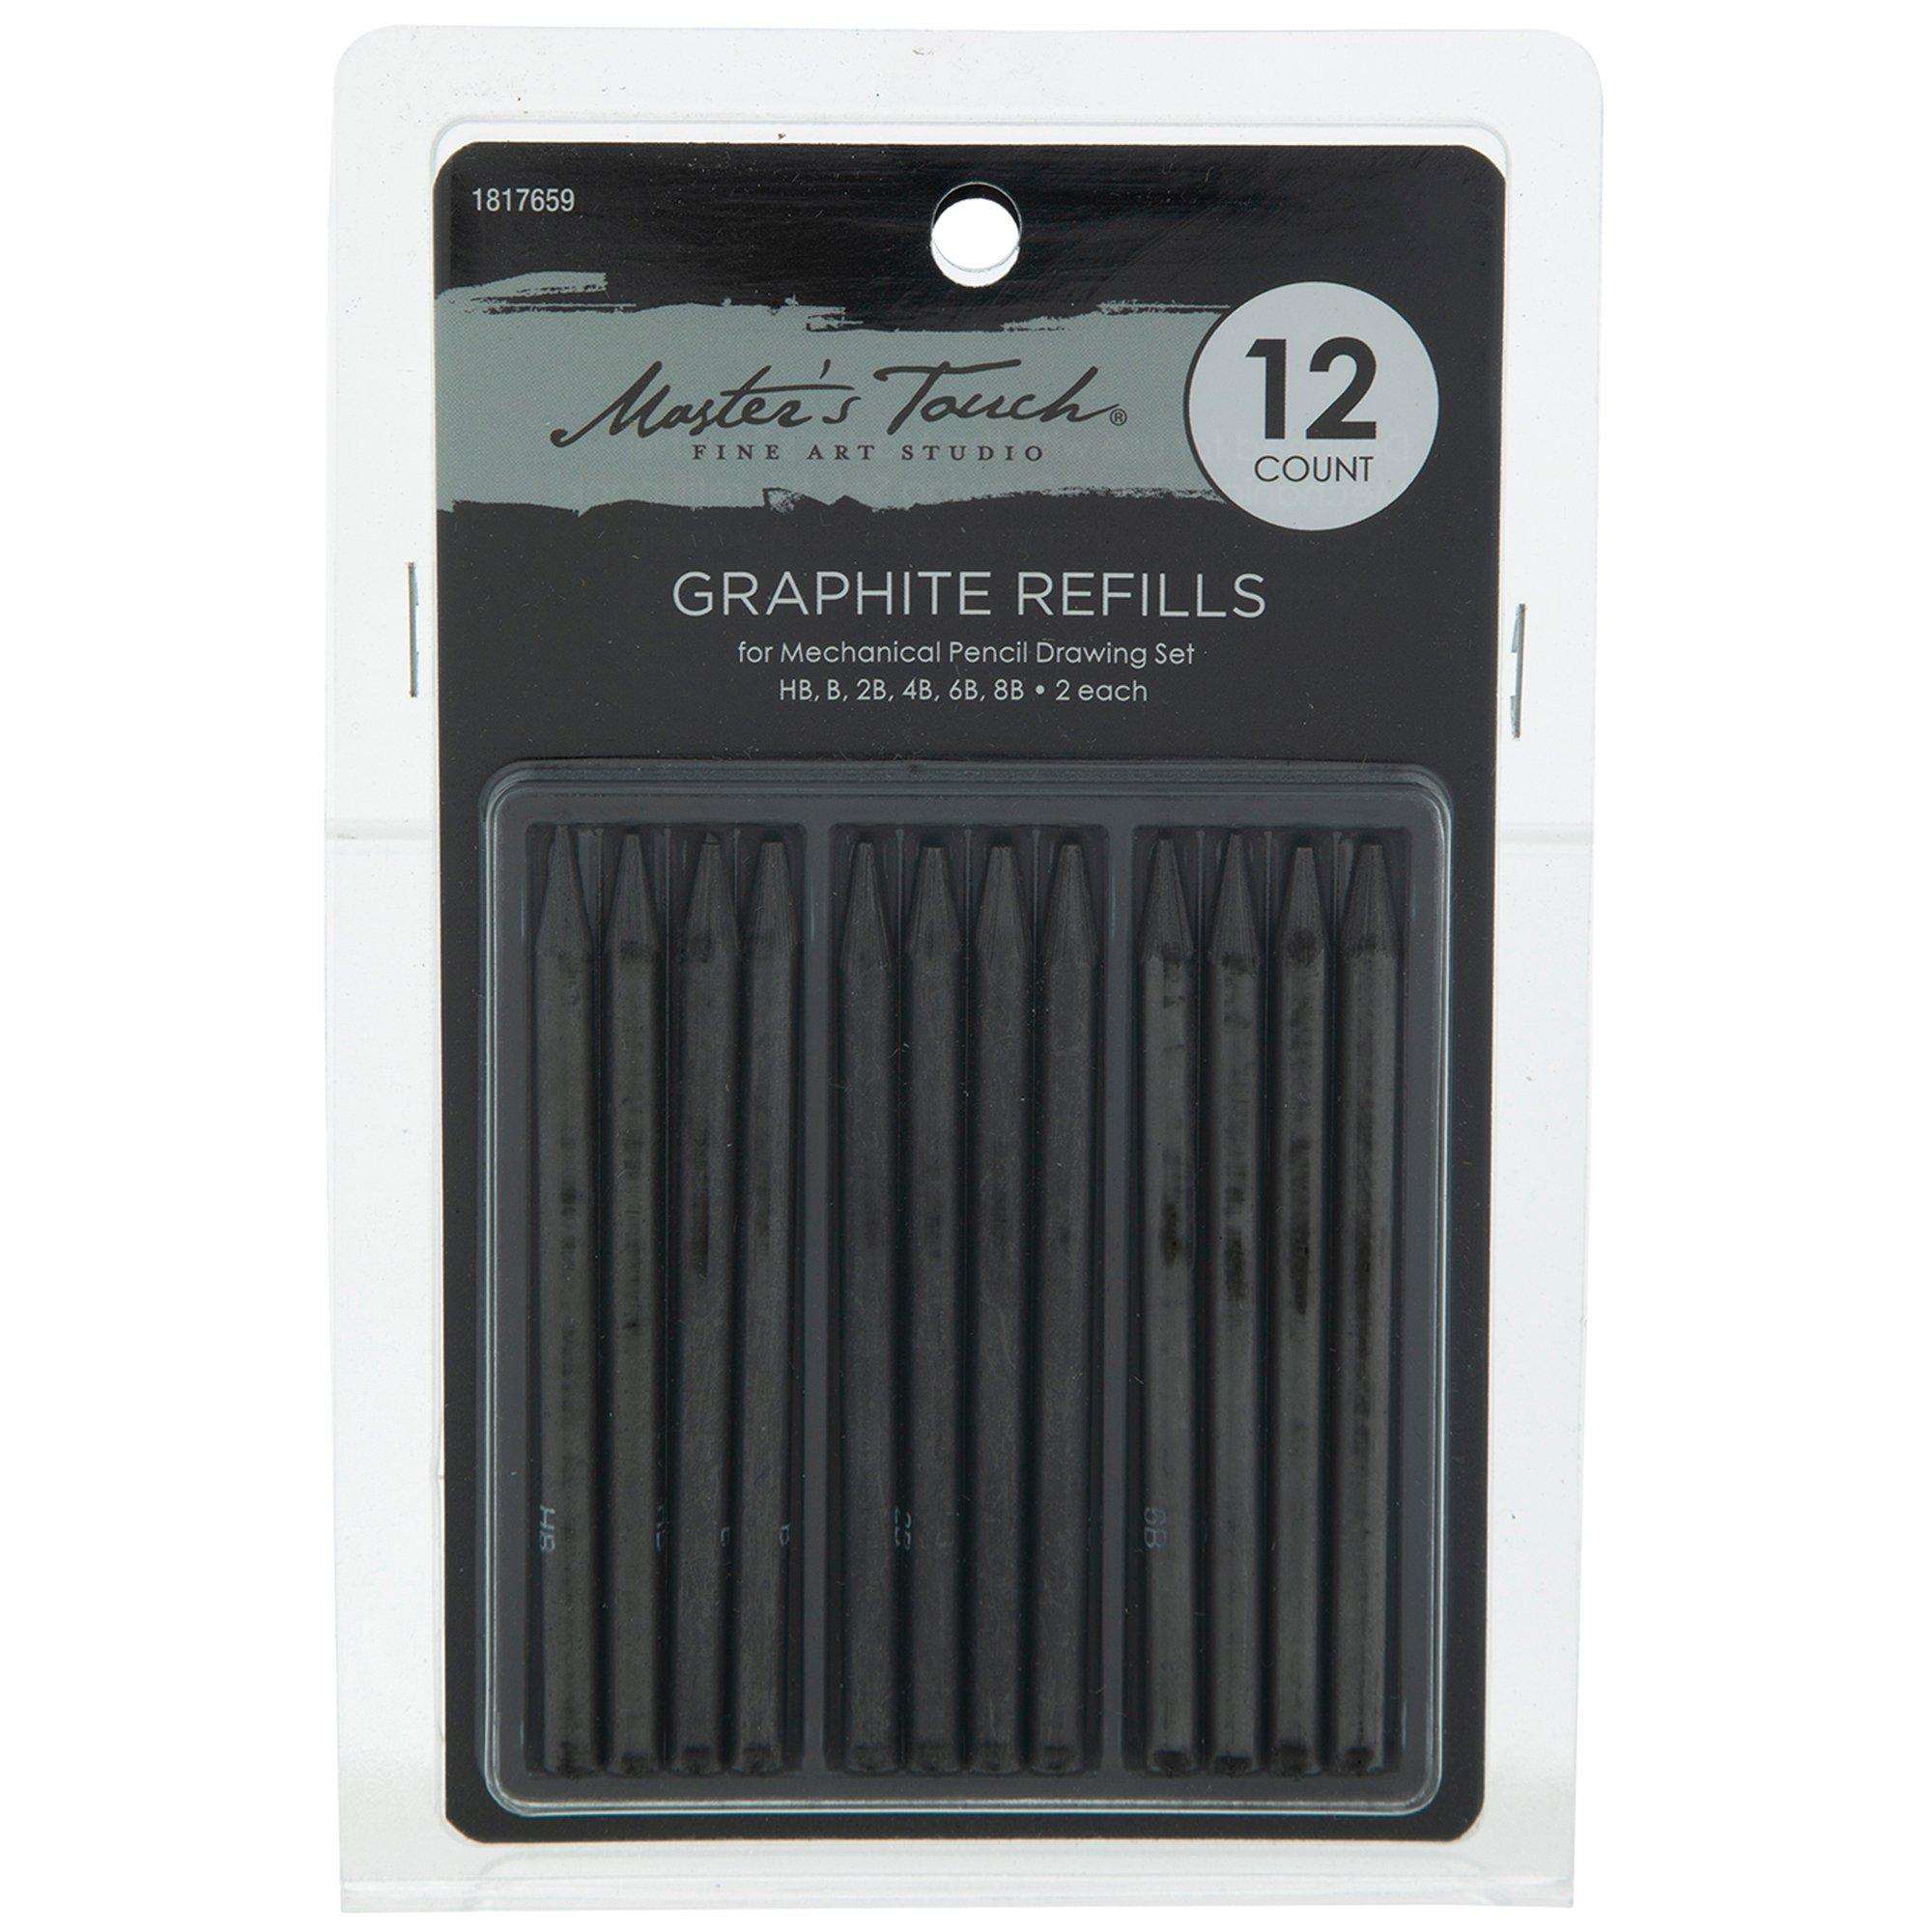 Buy Graphite refill f construction marker in container online